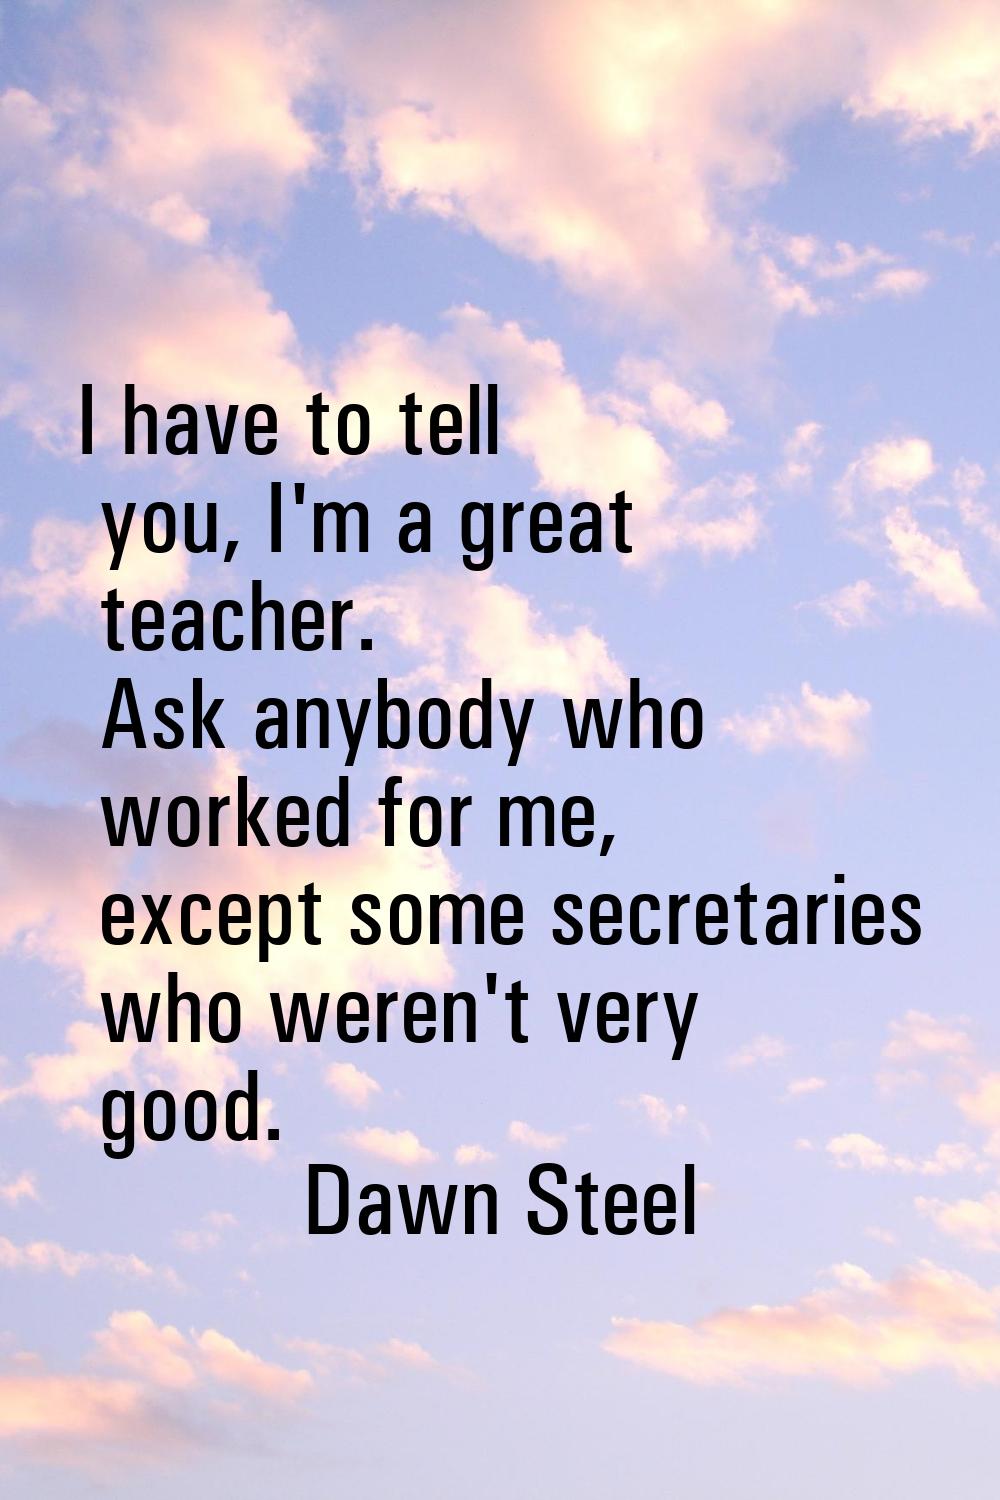 I have to tell you, I'm a great teacher. Ask anybody who worked for me, except some secretaries who